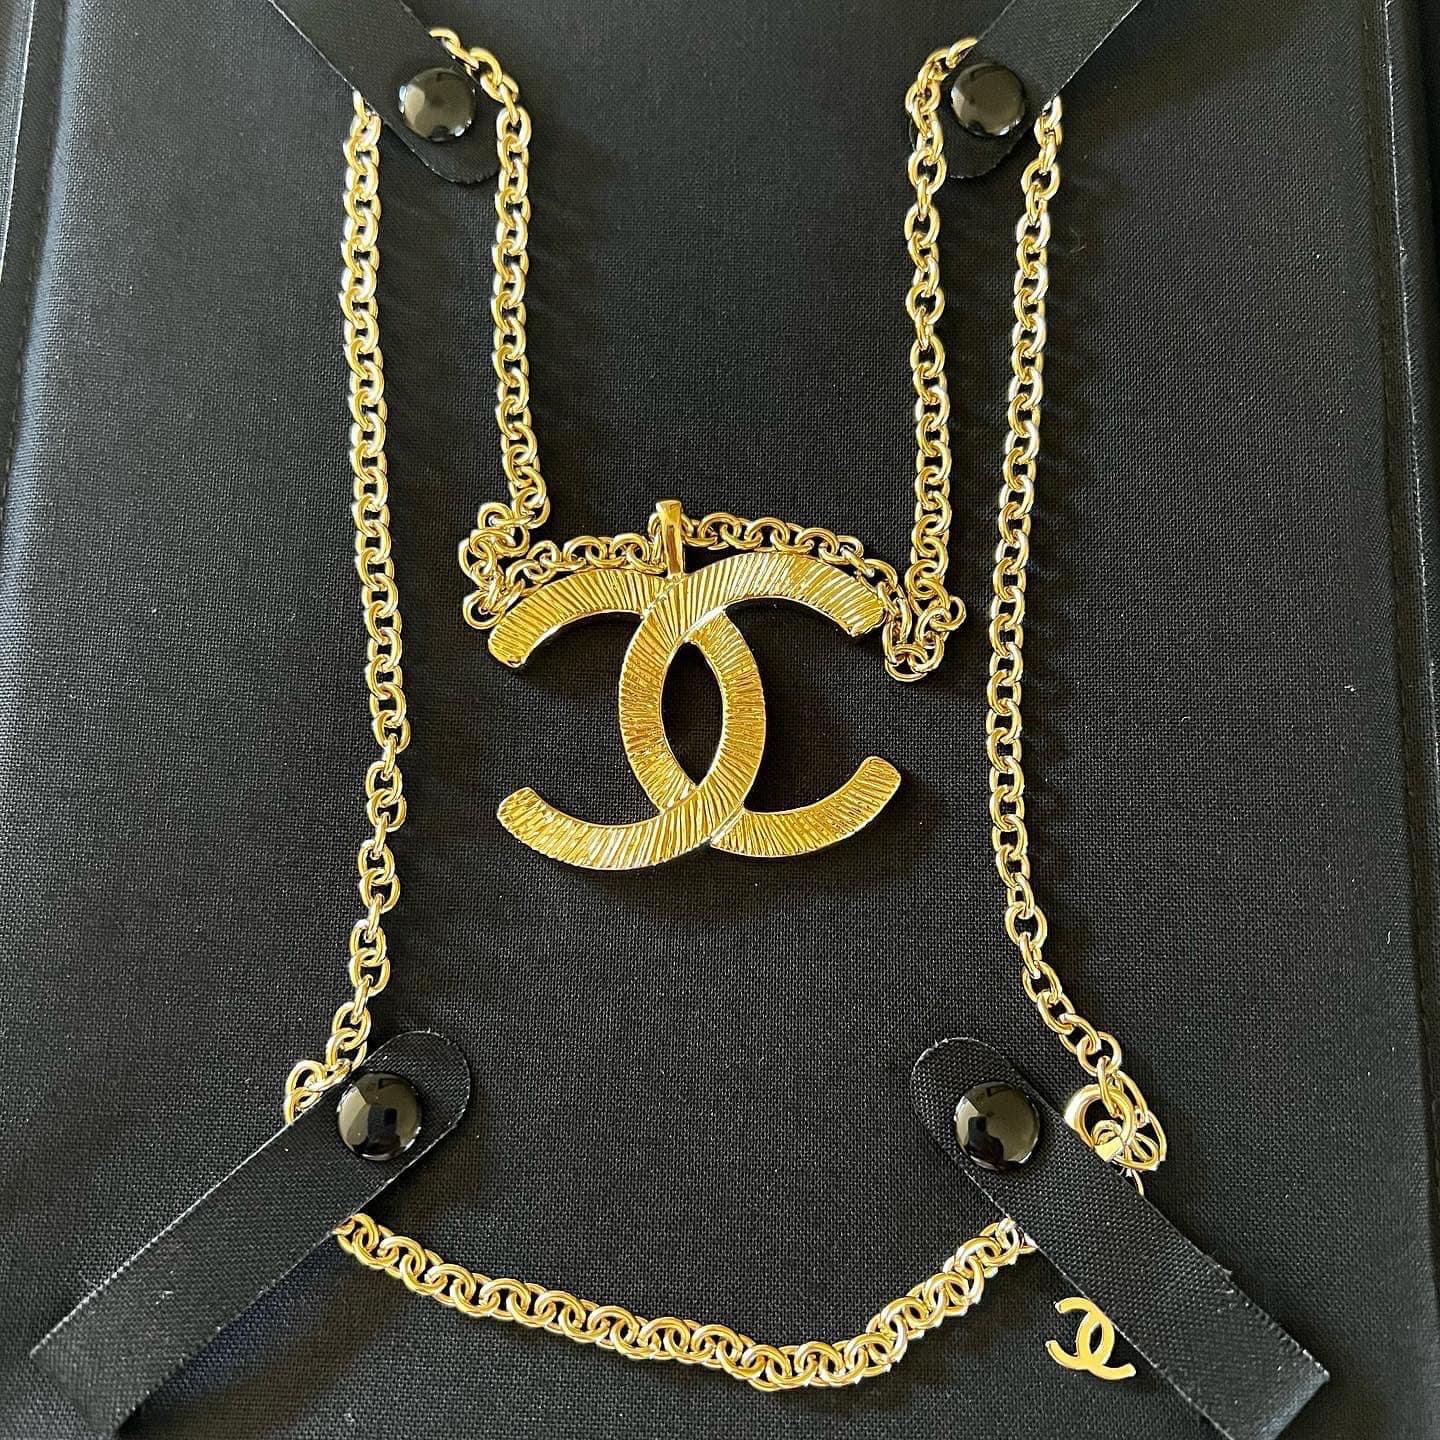 CHANEL, Jewelry, Chanel Bag Purse Cc Pendent Necklace